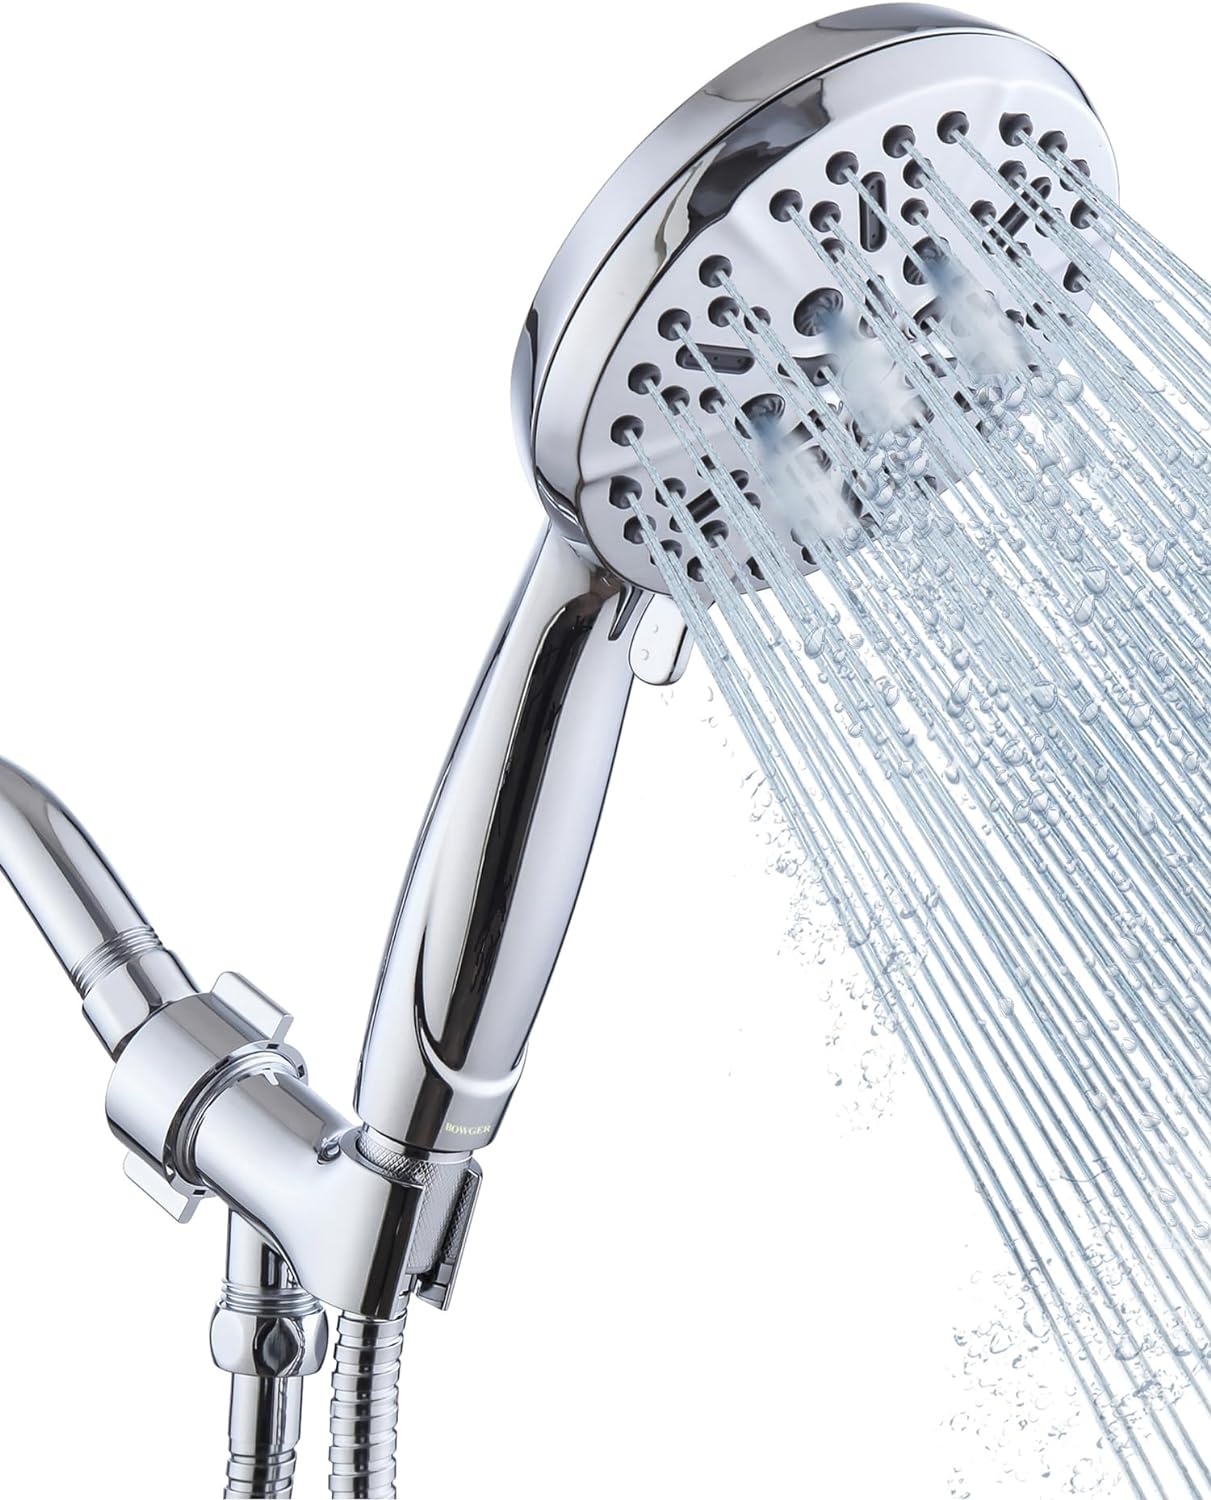 Shower Head with Handheld High Pressure-Full Body Coverage Powerful Rain Showerhead Extra 60 Long Hose and Adjustable Brass Joint Holder- The Perfect Detachable Heads for Bathroom Upgrade